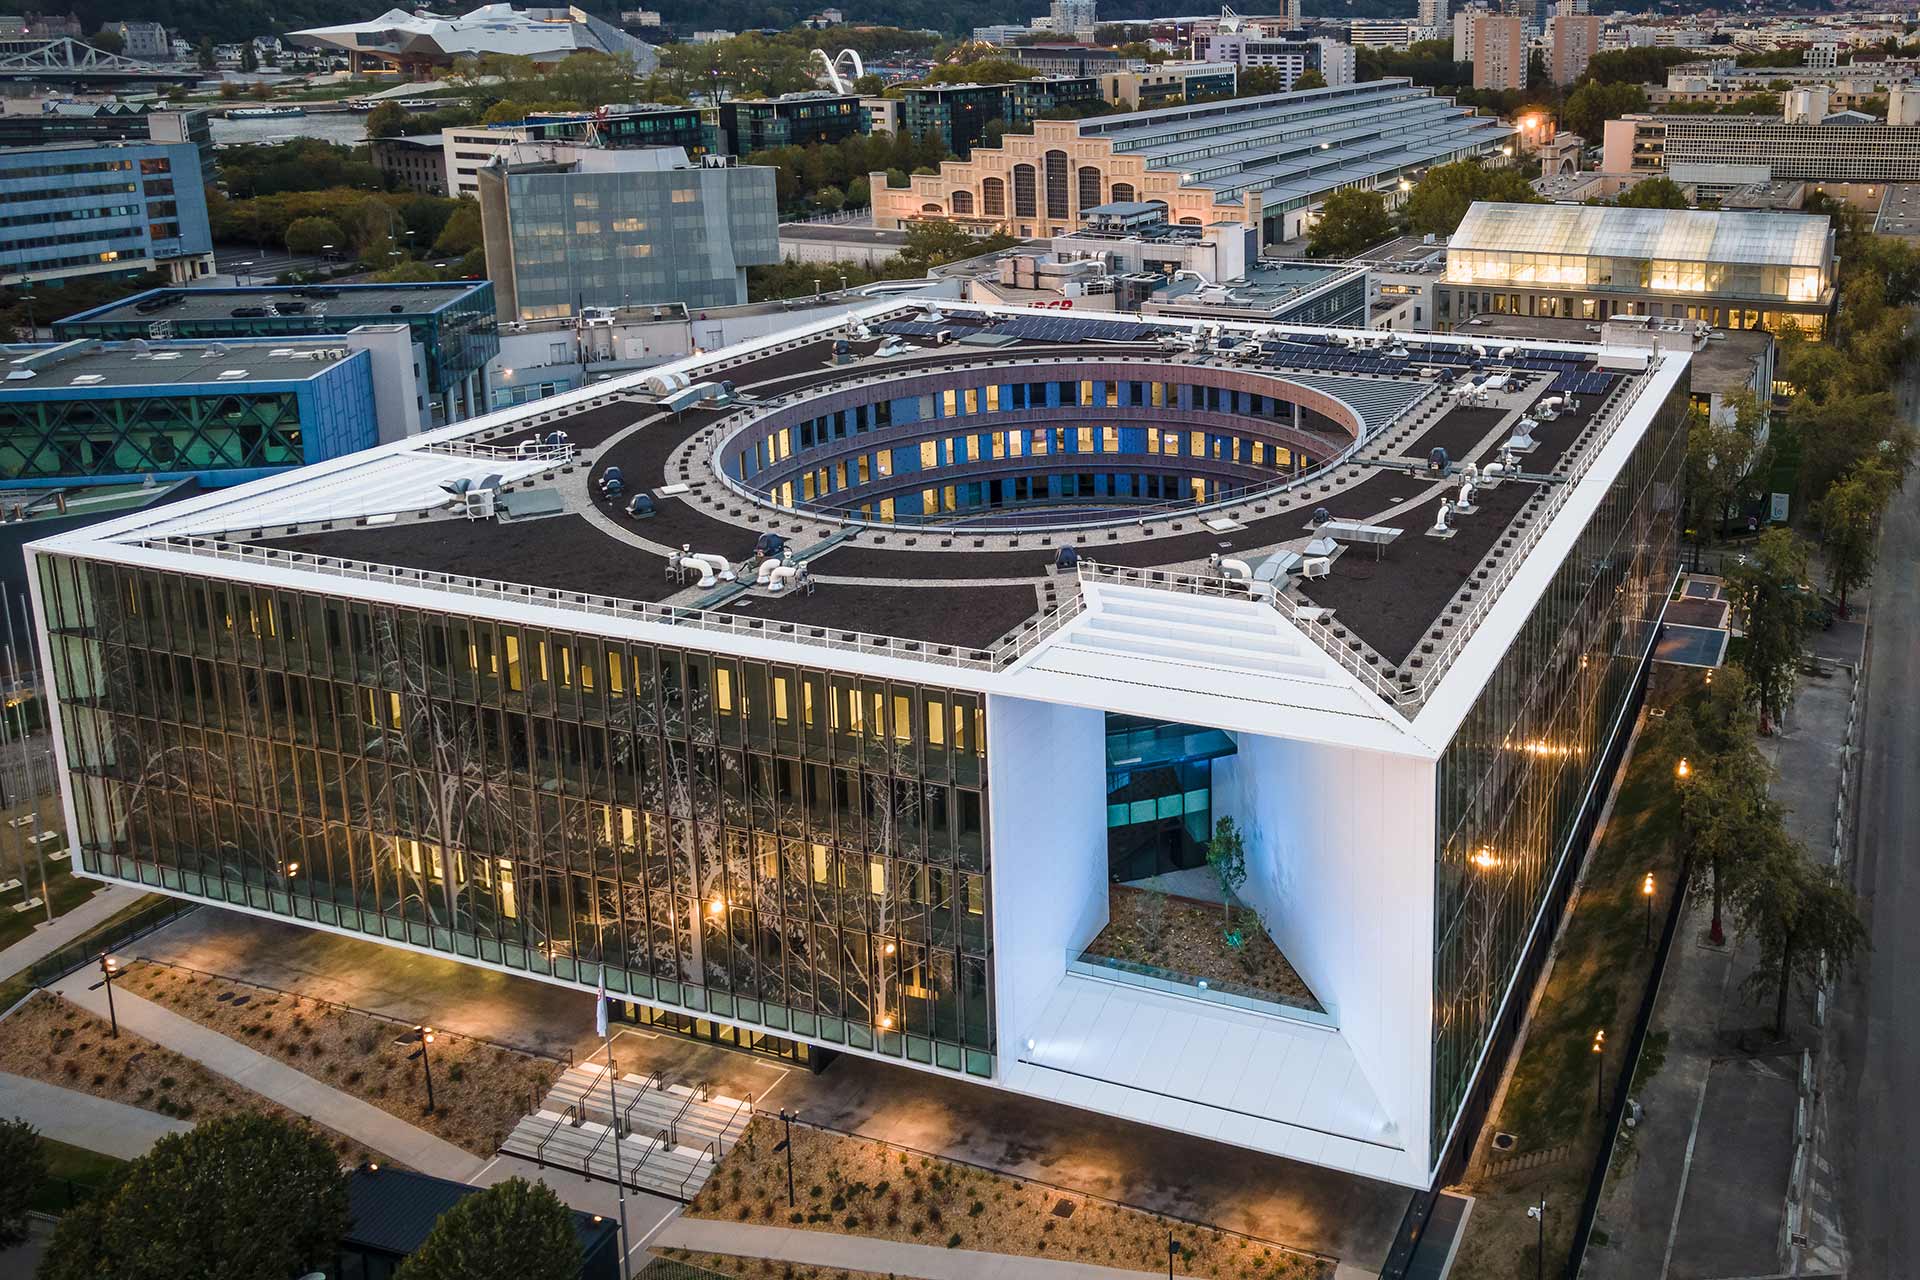 External aerial view of the Nouveau Centre, building of the headquarters of the International Agency for Research on Cancer (IARC) installed in the heart of the Lyon-Gerland Biodistrict (Lyon metropolitan area, France)